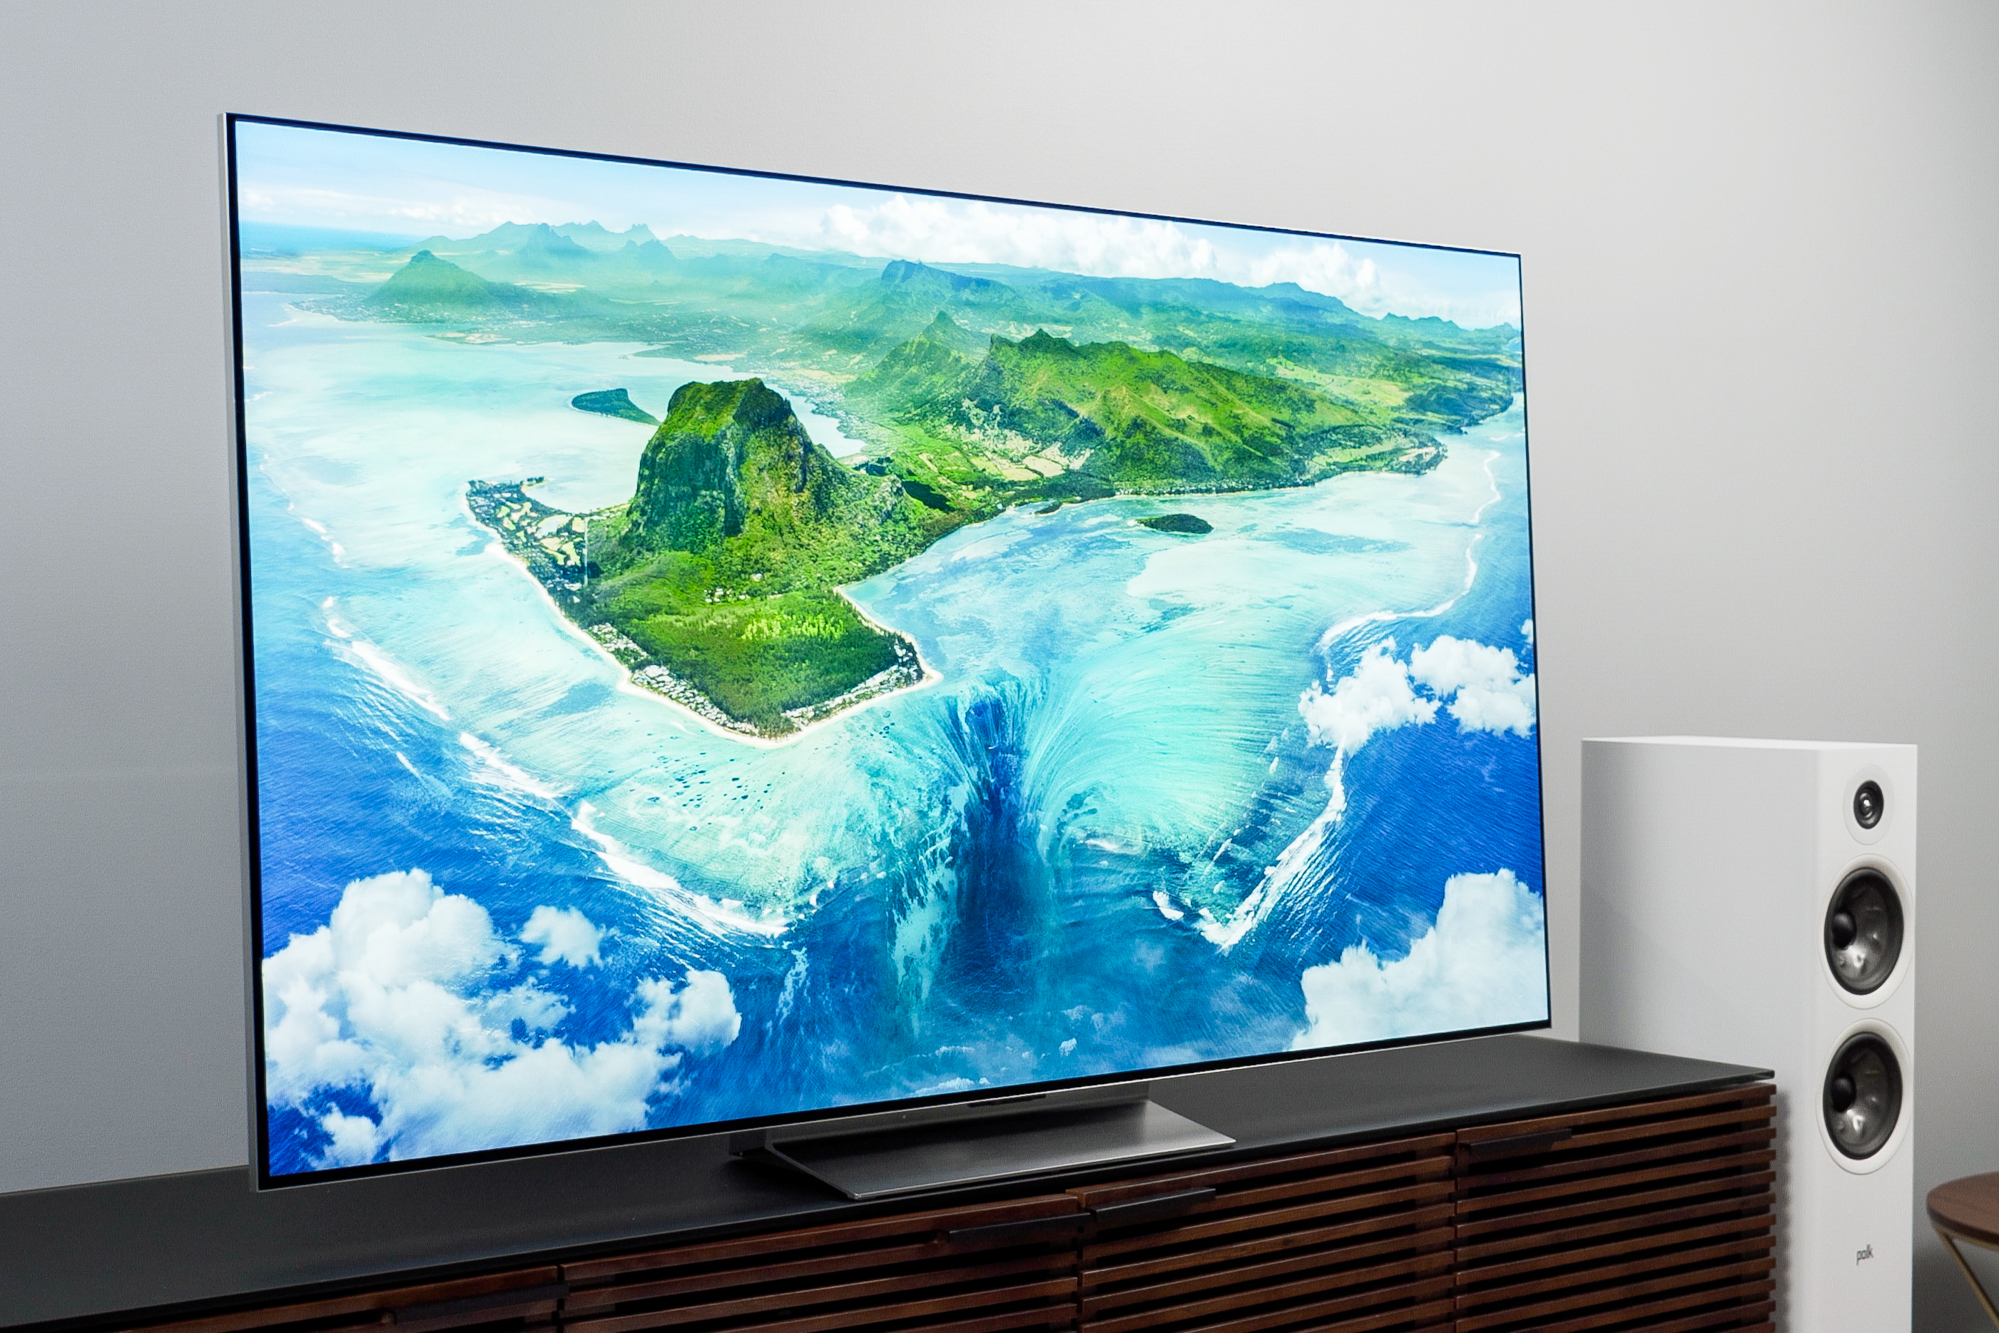  The best TVs of 2022: our favorites from Samsung, LG, Sony, and more